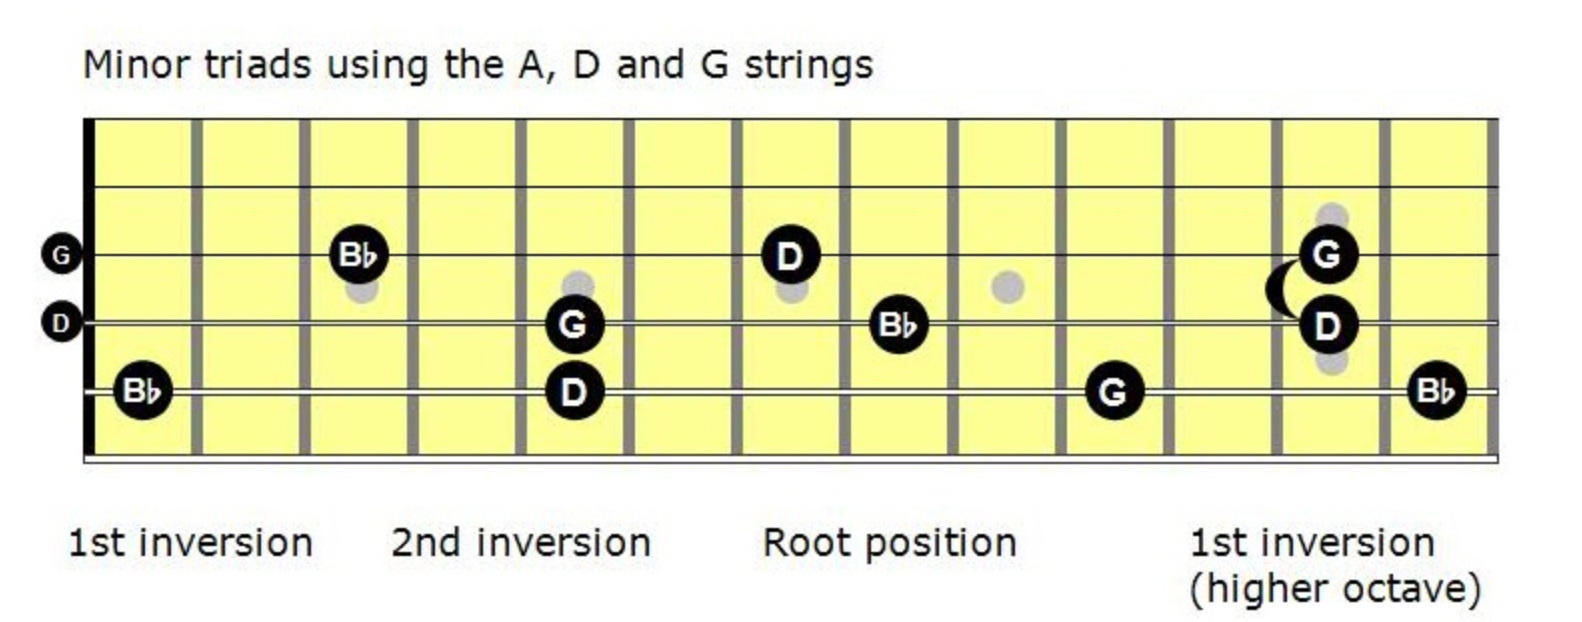 Minor Triad: all inversions on A, D, and G strings